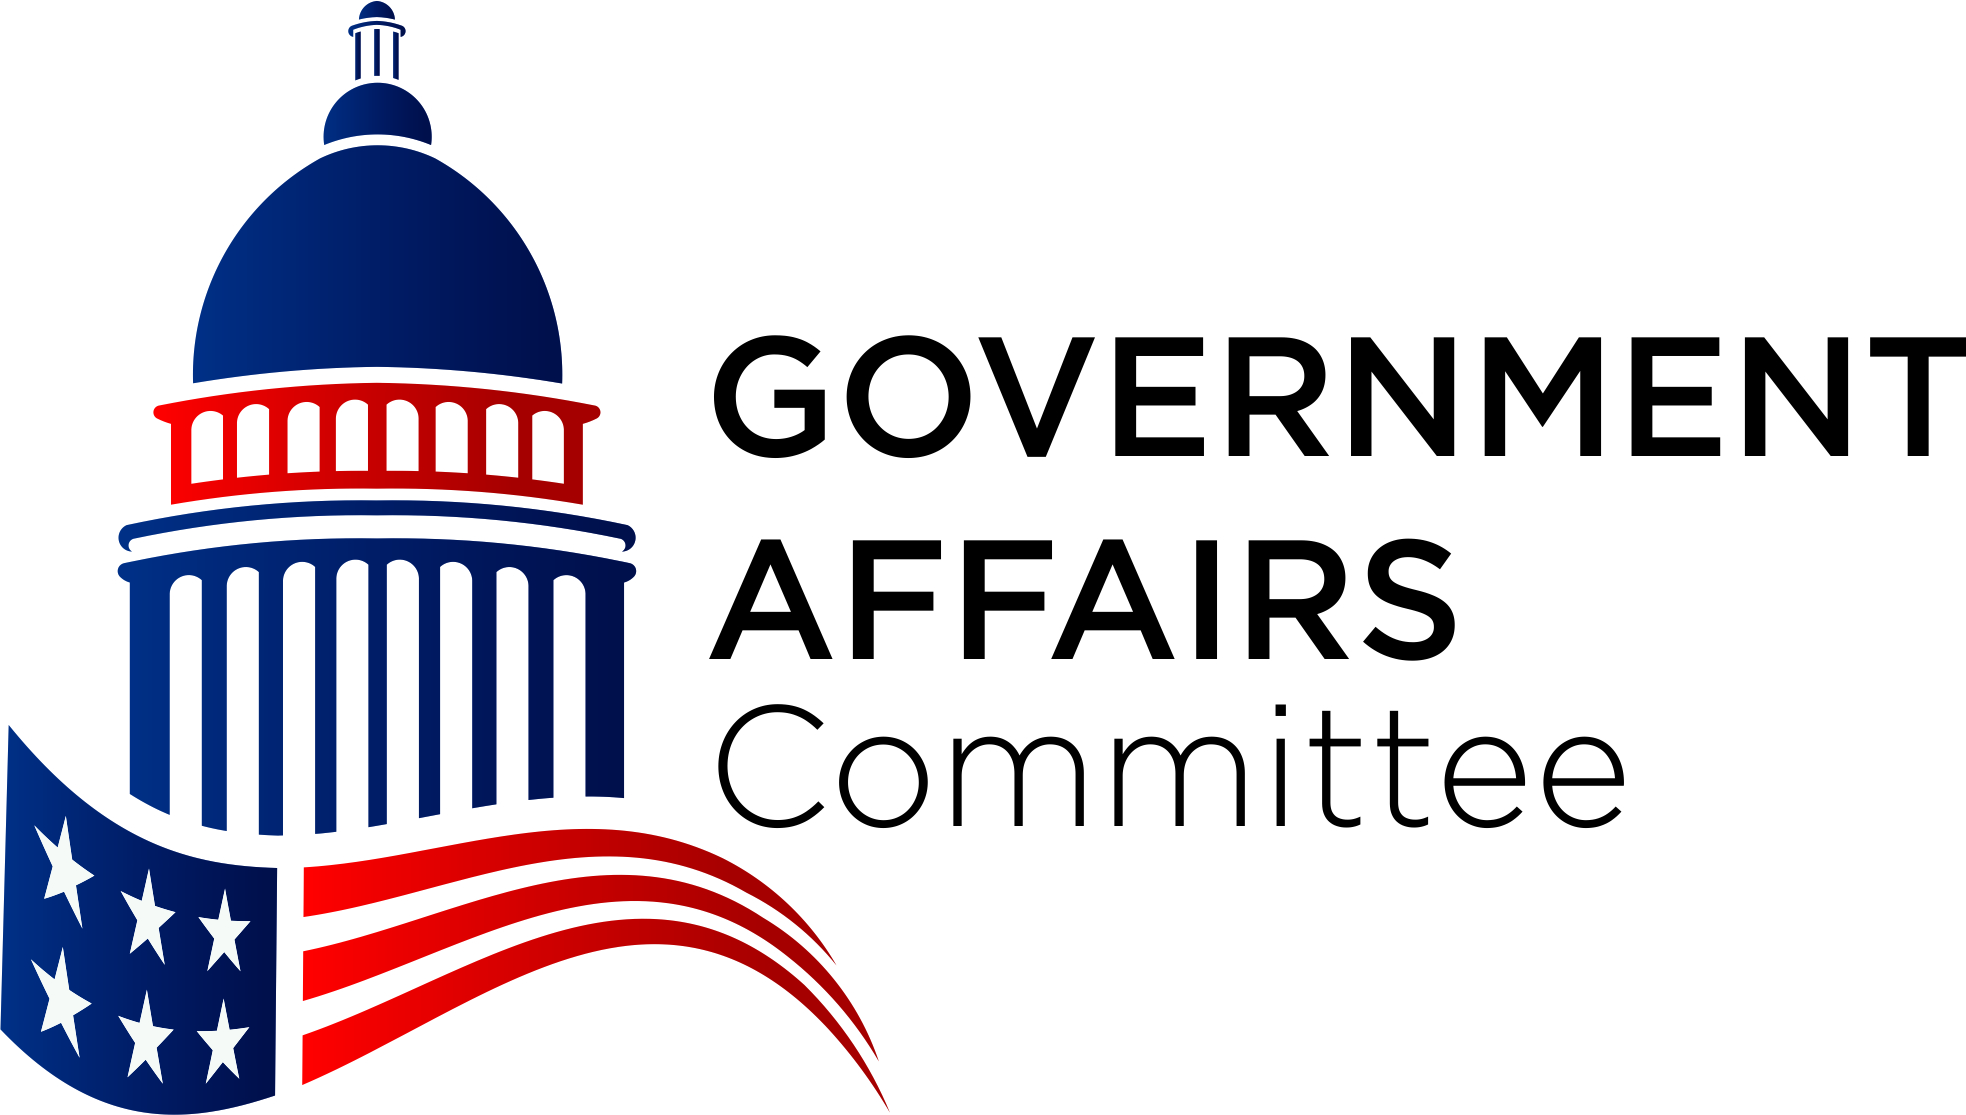 February Government Affairs Committee: OC Registrar of Voters Update